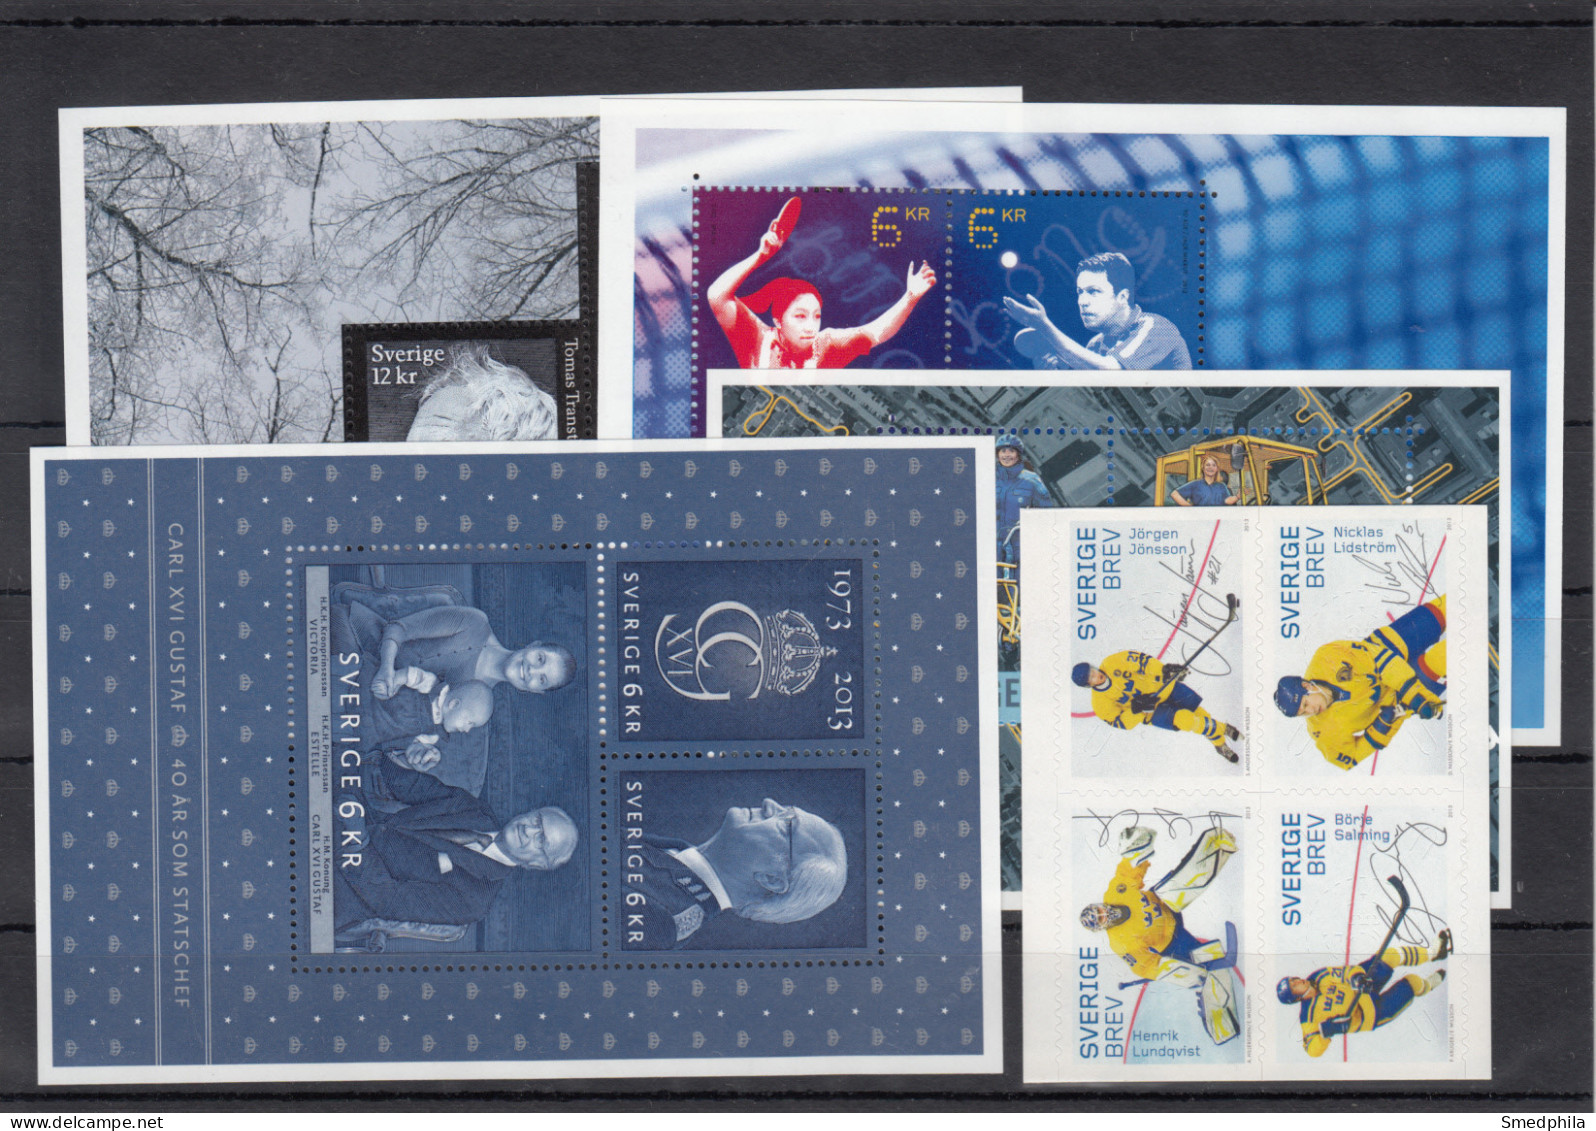 Sweden 2013 - Full Year MNH ** - Annate Complete